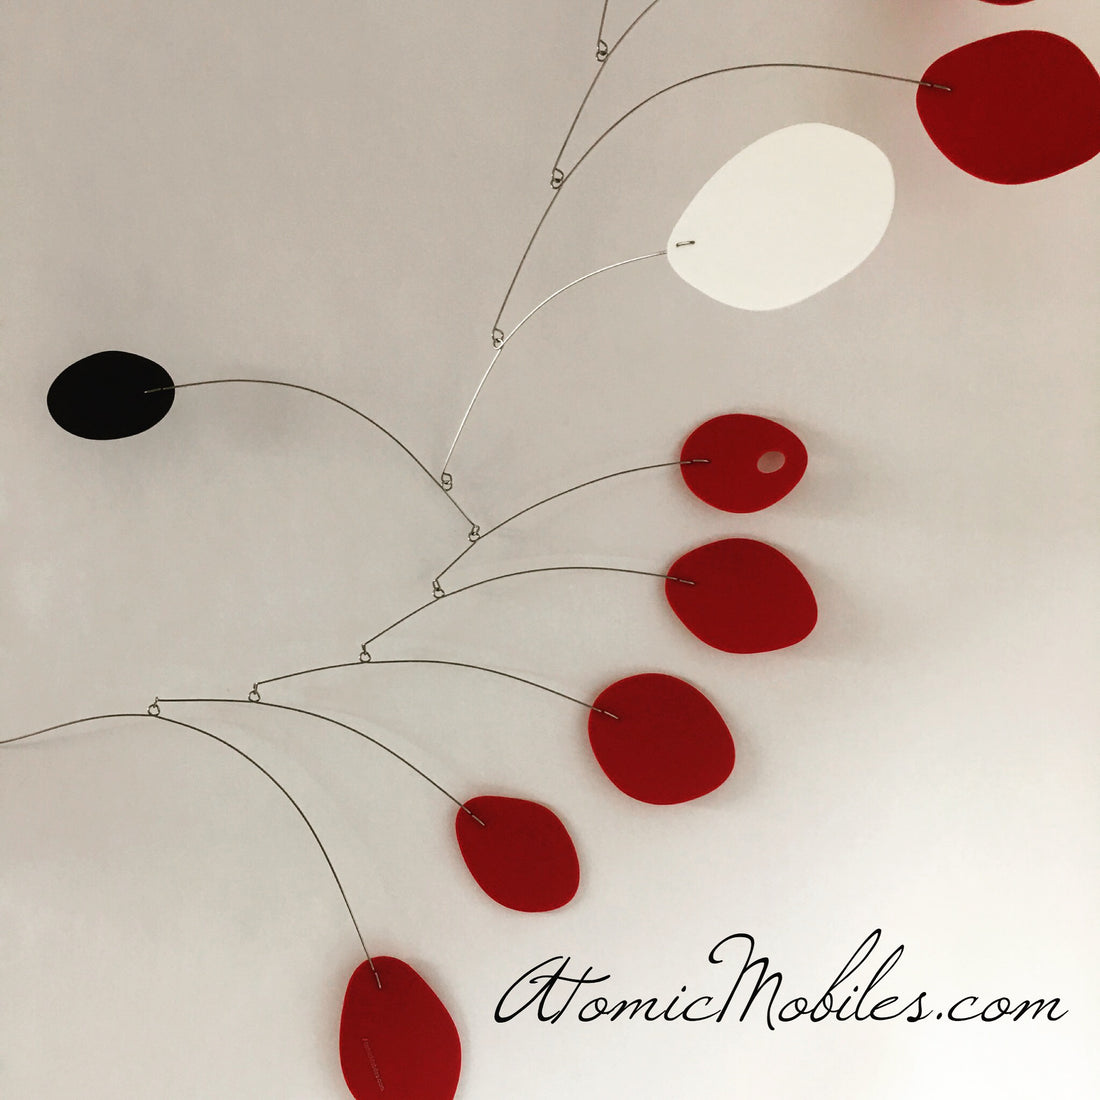 The MCM Mid Century Modern Hanging Art Mobile Shipped to Client in UK